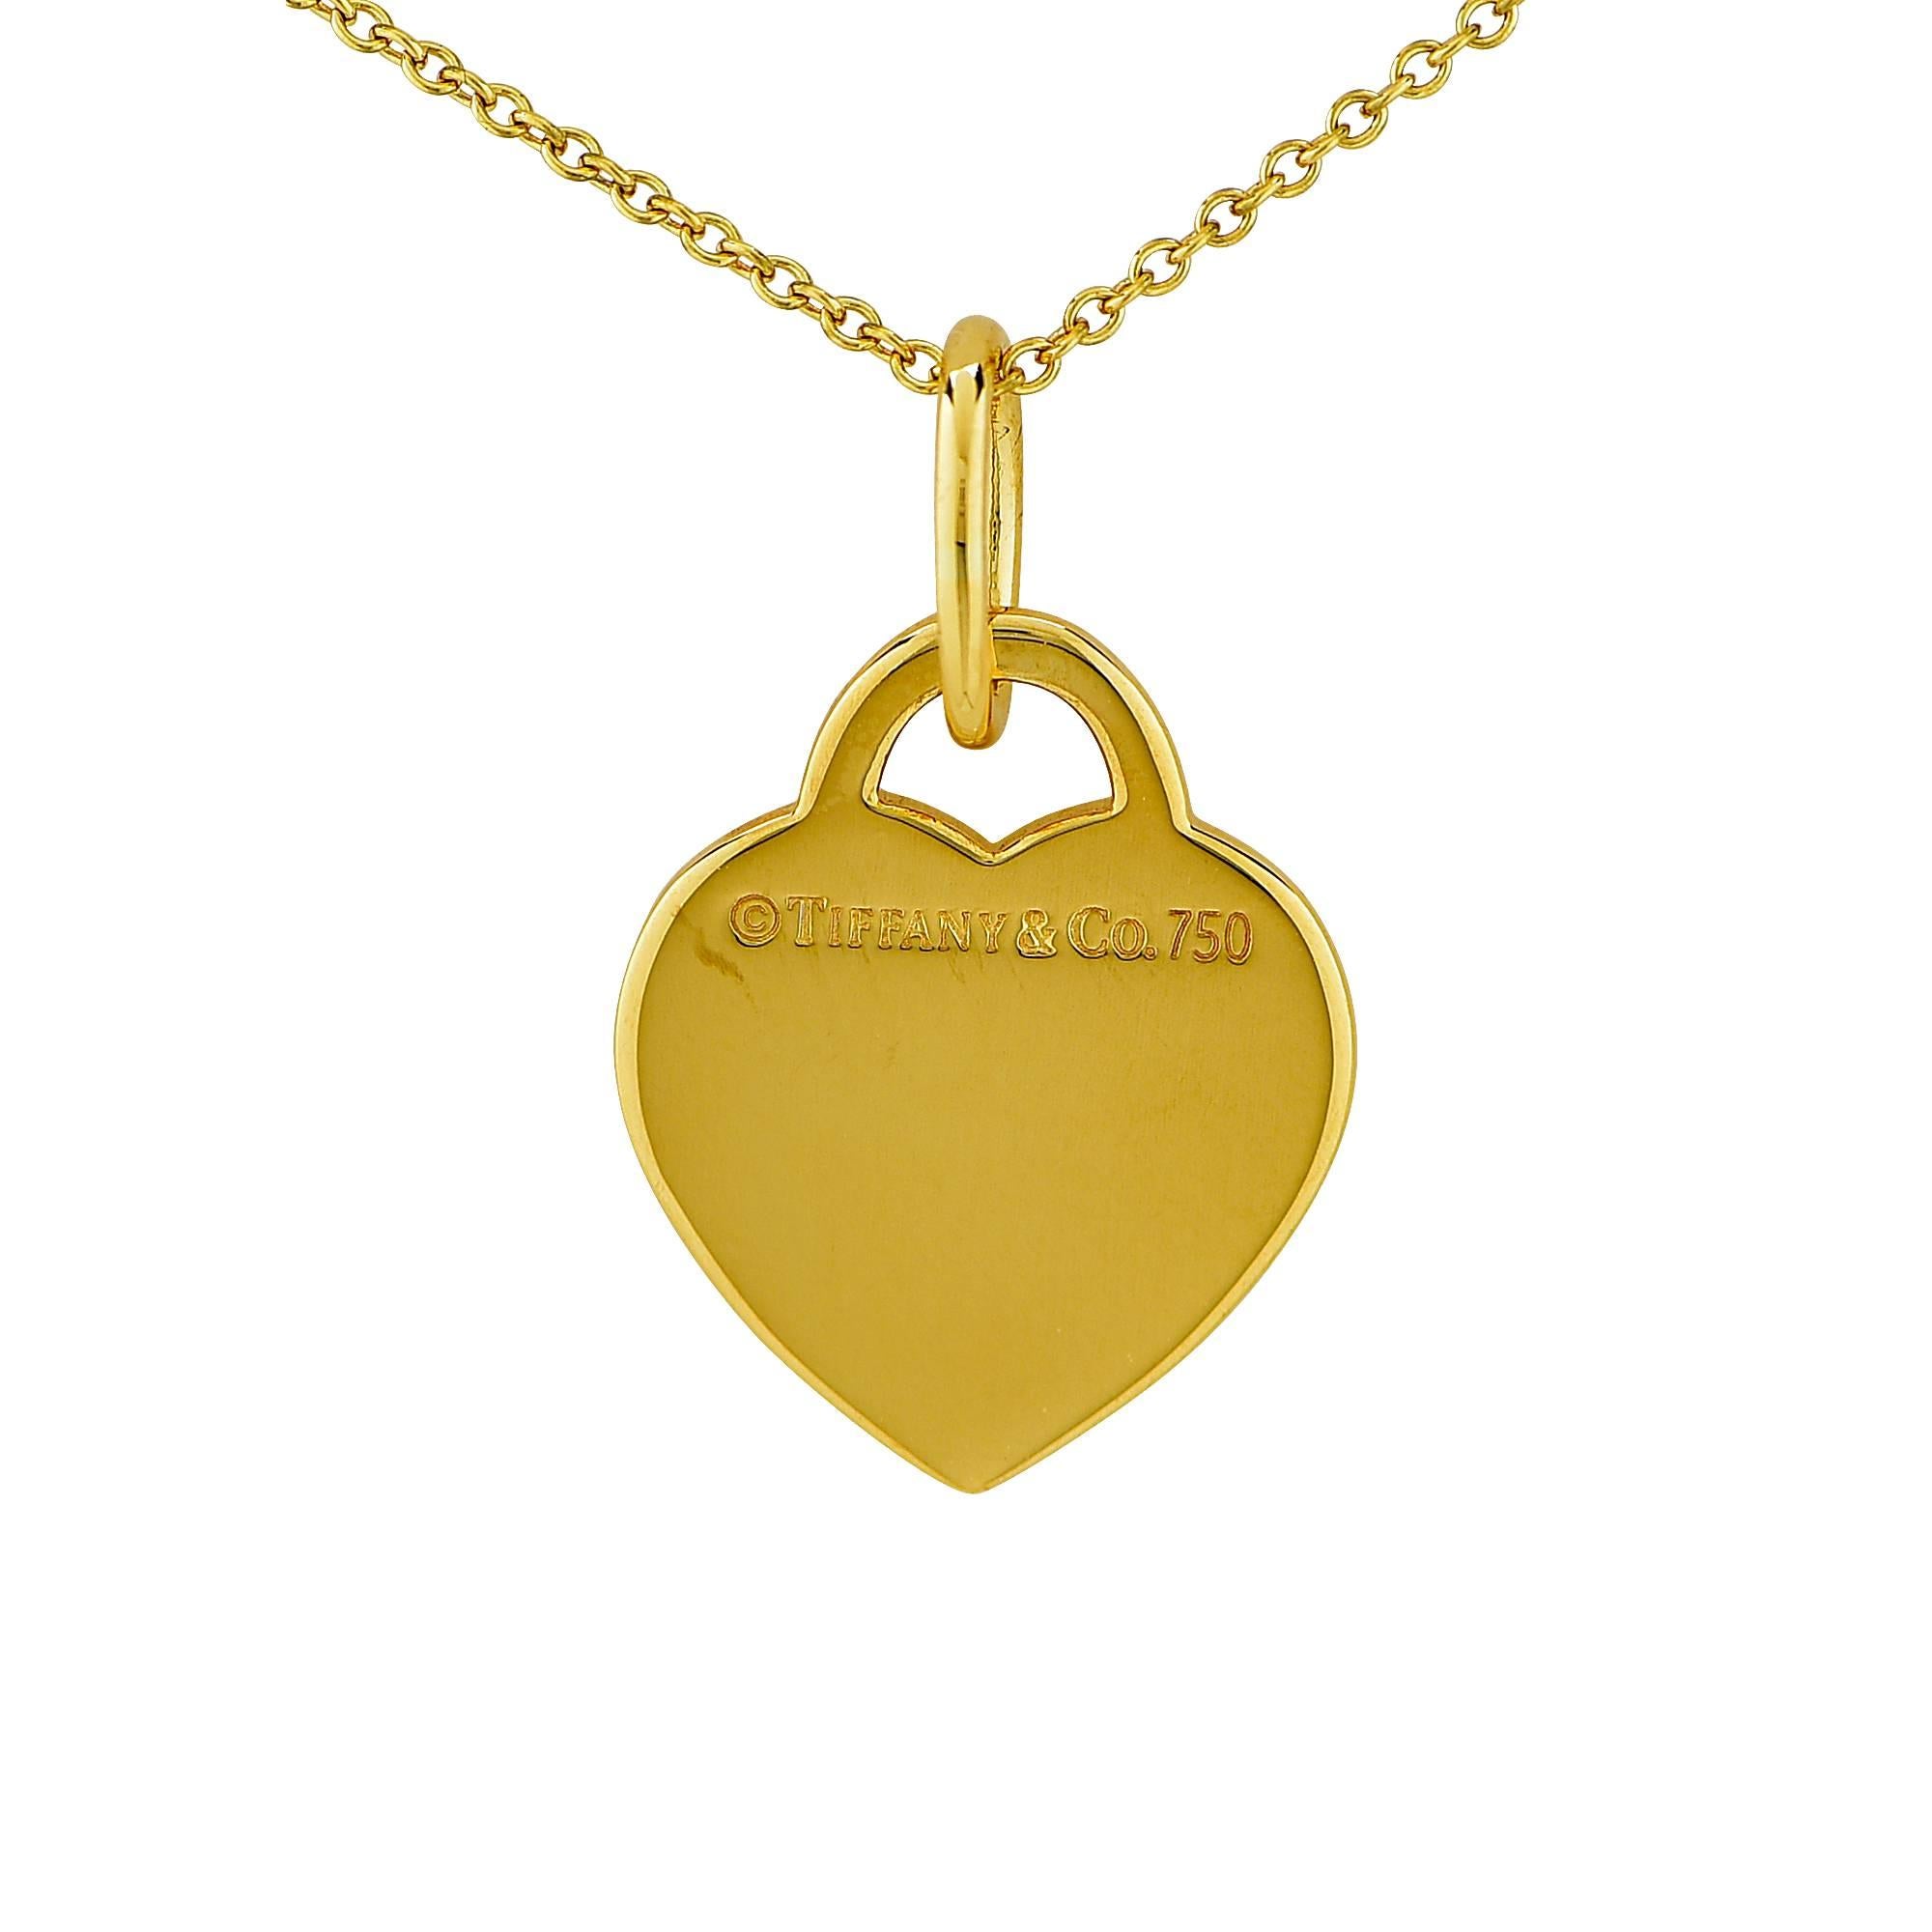 18k yellow gold Tiffany & Co.heart pendant and necklace.

Metal weight: 5.76 grams

This gold necklace is accompanied by a retail appraisal performed by a GIA Graduate Gemologist.